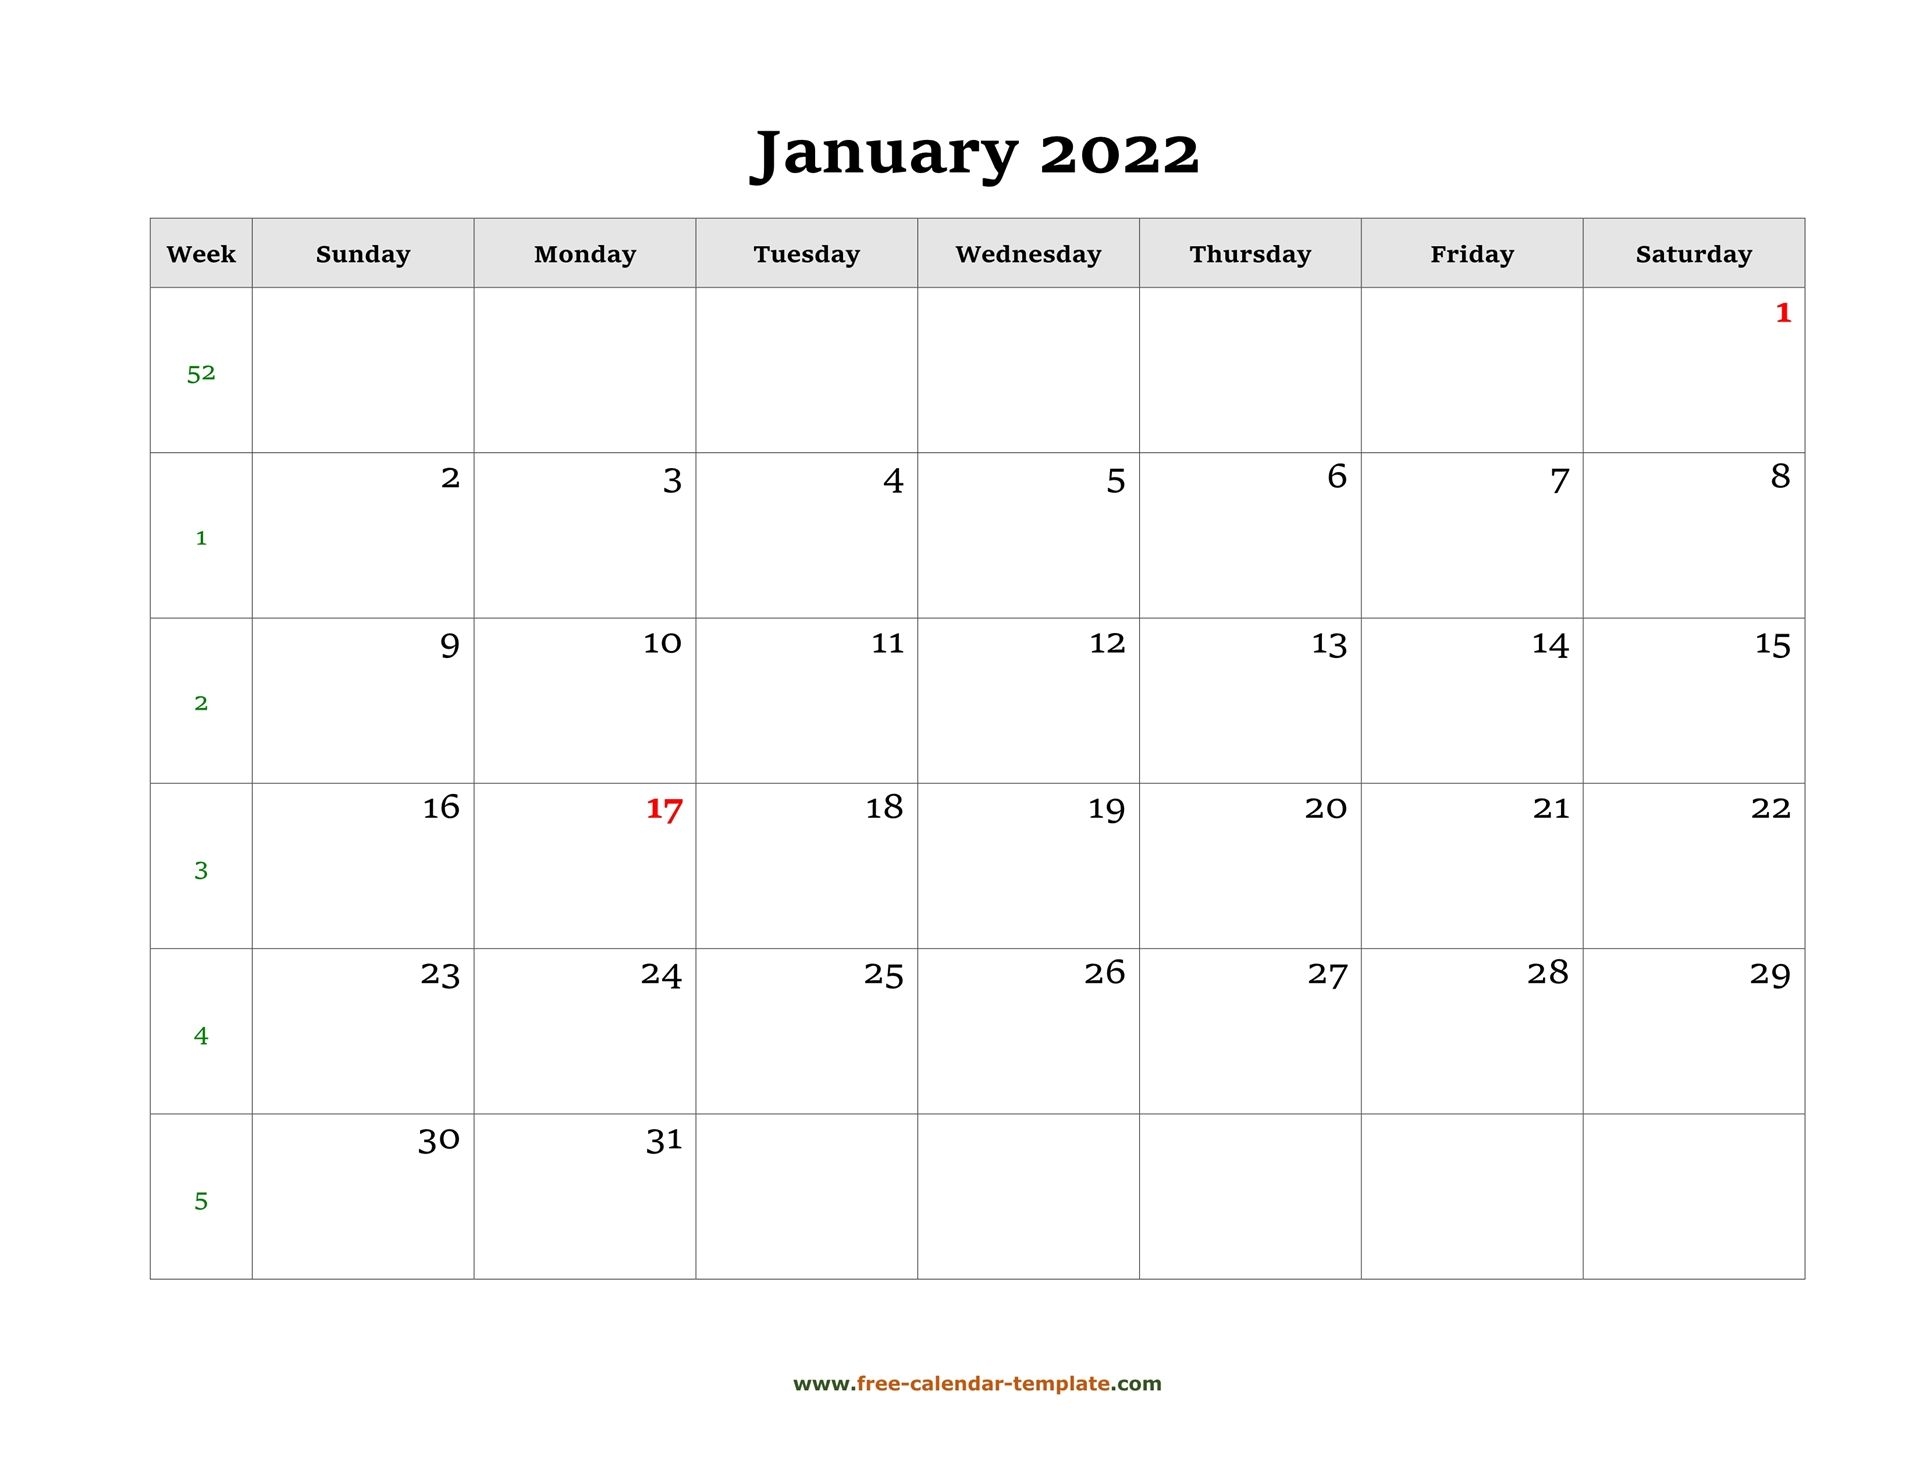 Simple Monthly Calendar 2022 Large Box On Each Day For